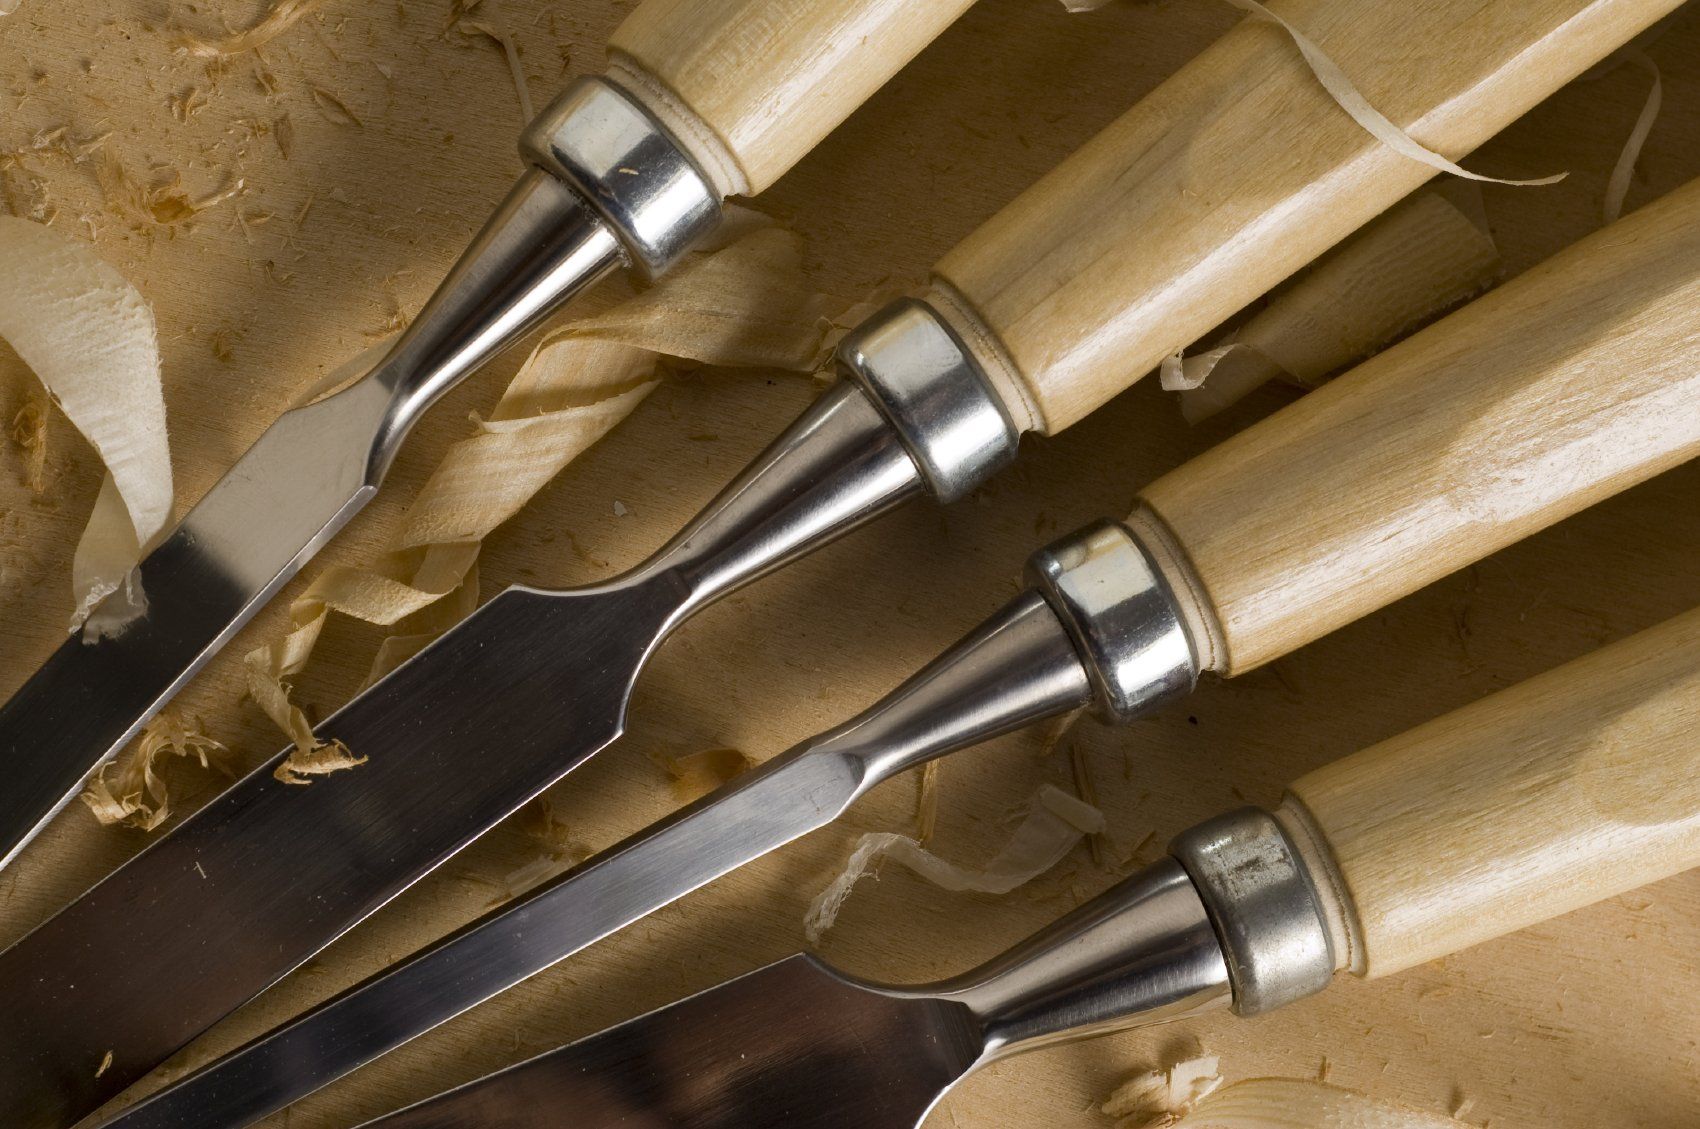 Four chisels sitting on a workbench.